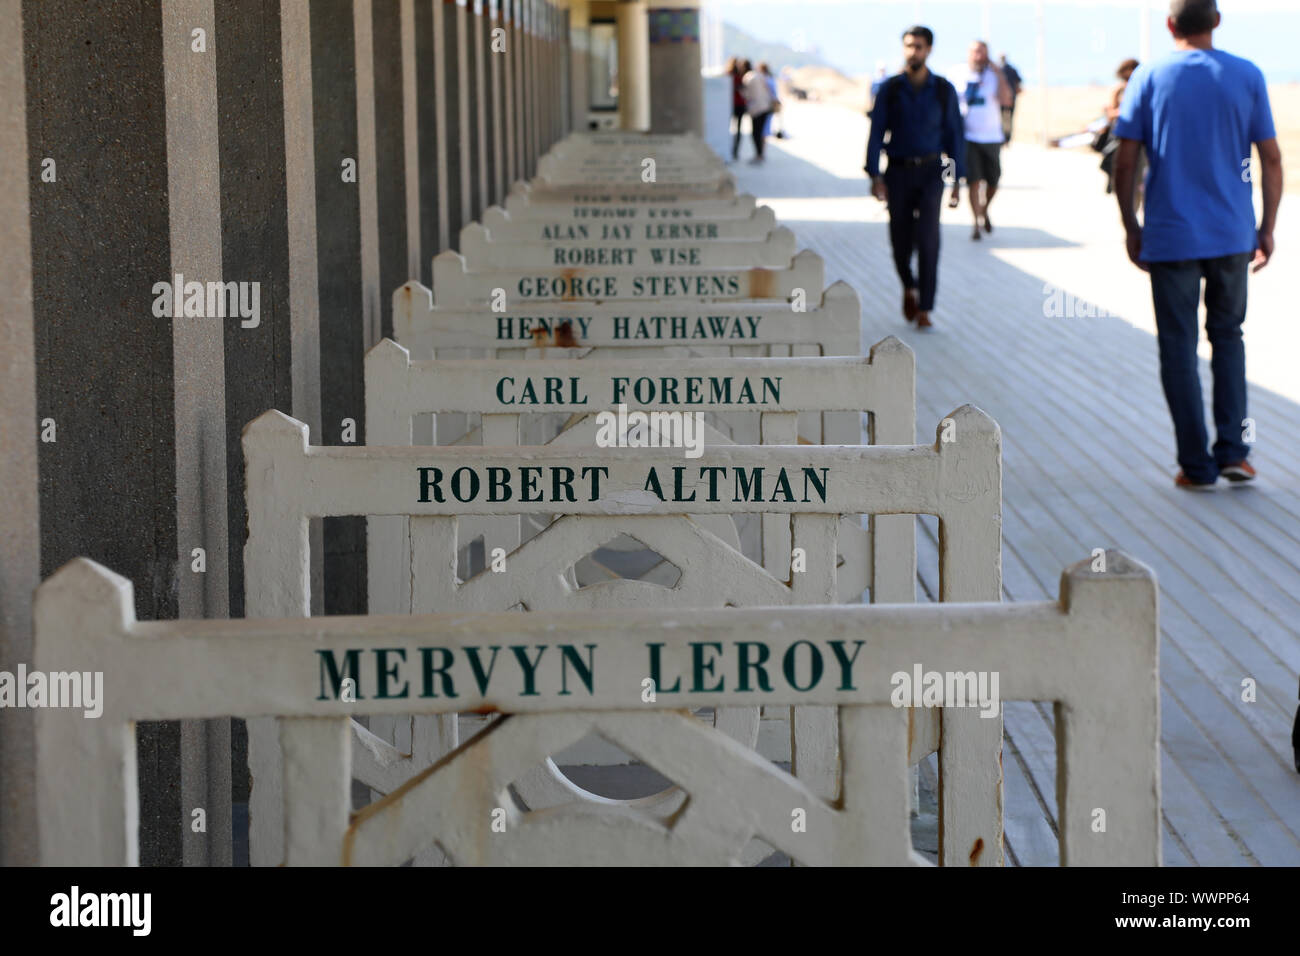 Deauville / France – September 14, 2019: Pedestrians walk along the Promenade des Planches, where names of film stars who have visited are painted out Stock Photo